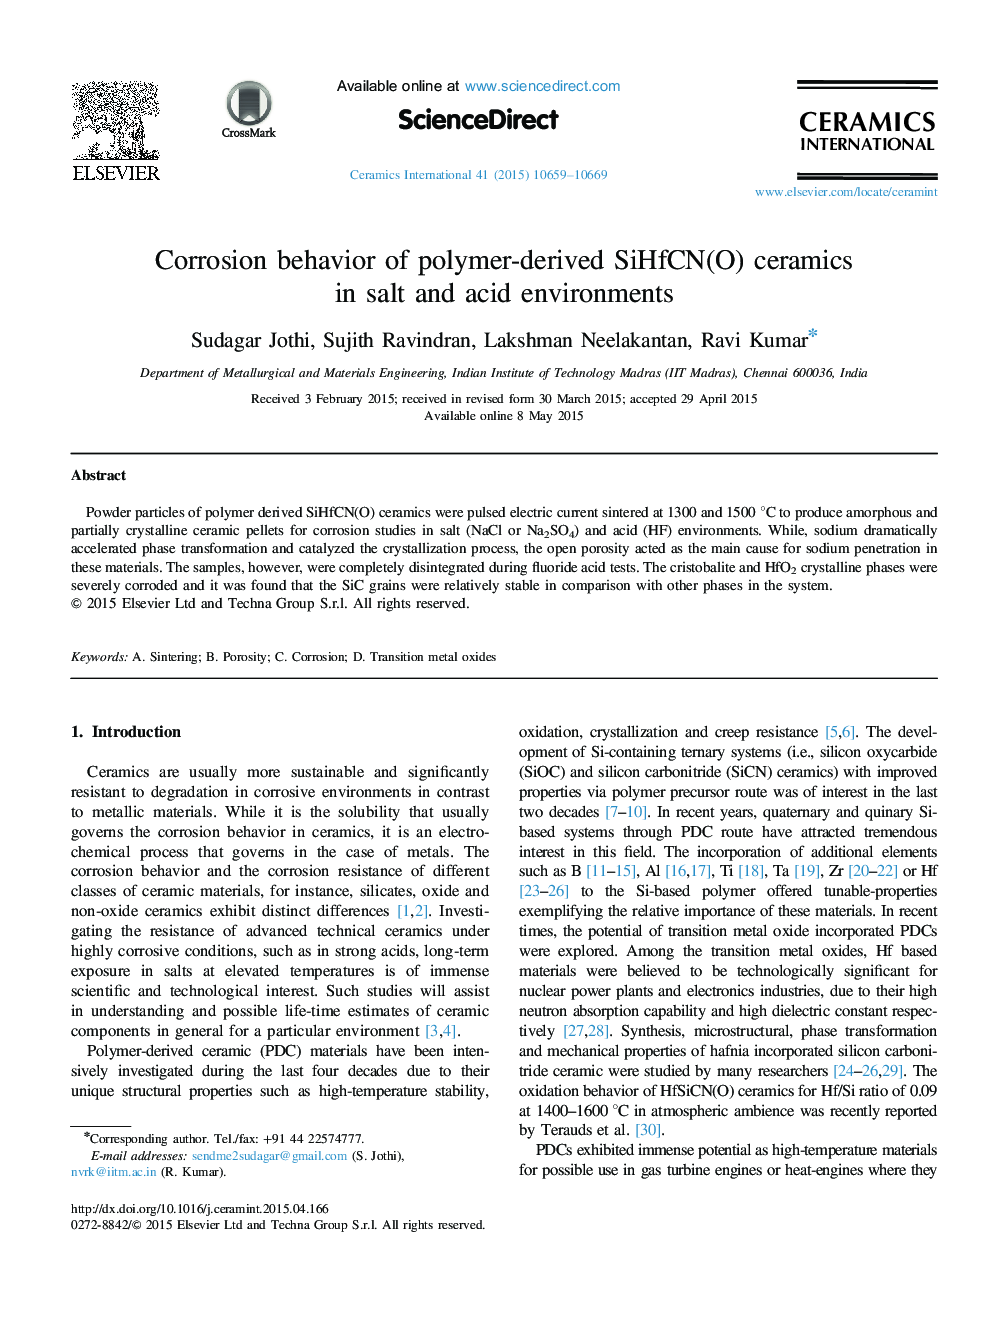 Corrosion behavior of polymer-derived SiHfCN(O) ceramics in salt and acid environments